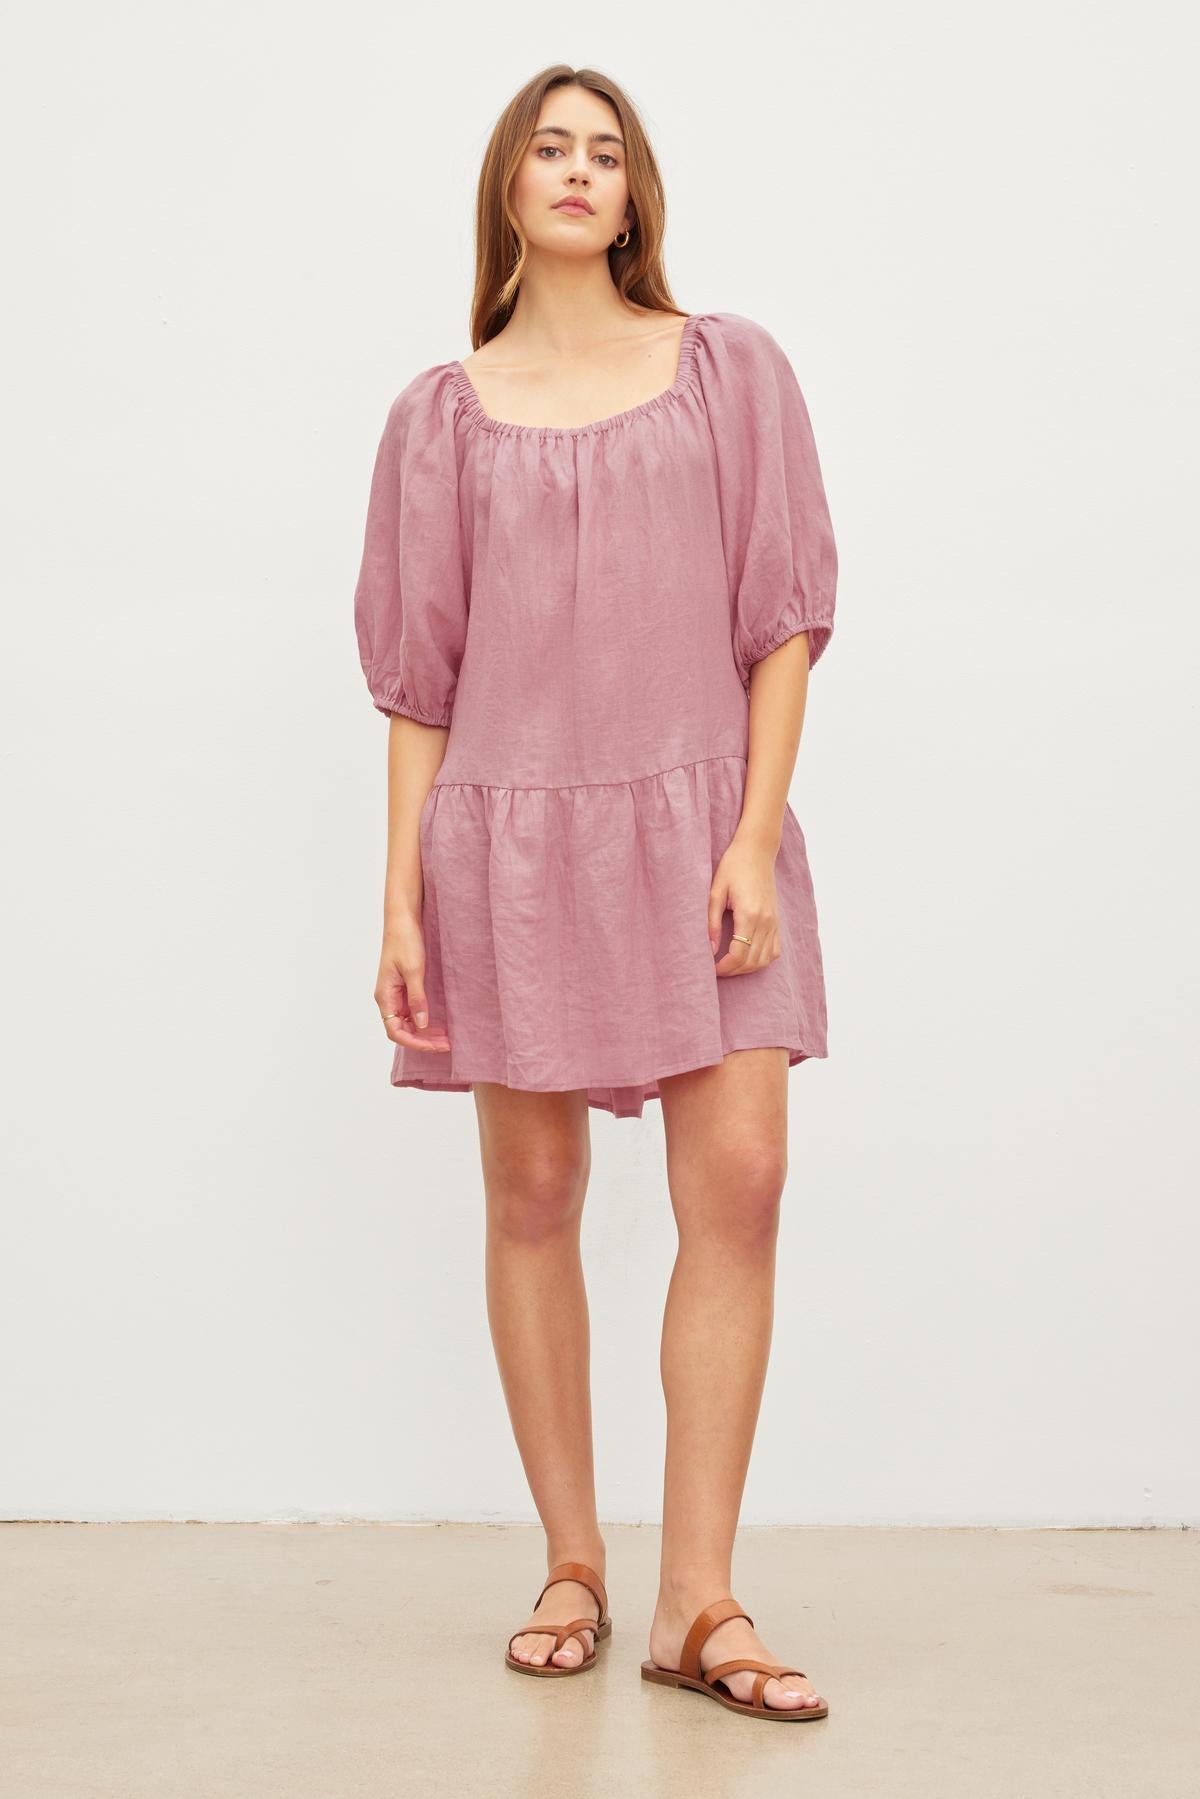   A woman stands against a plain background, wearing a pink off the shoulder IRINA LINEN TIERED DRESS with puff sleeves and brown sandals. Designed by Velvet by Graham & Spencer. 